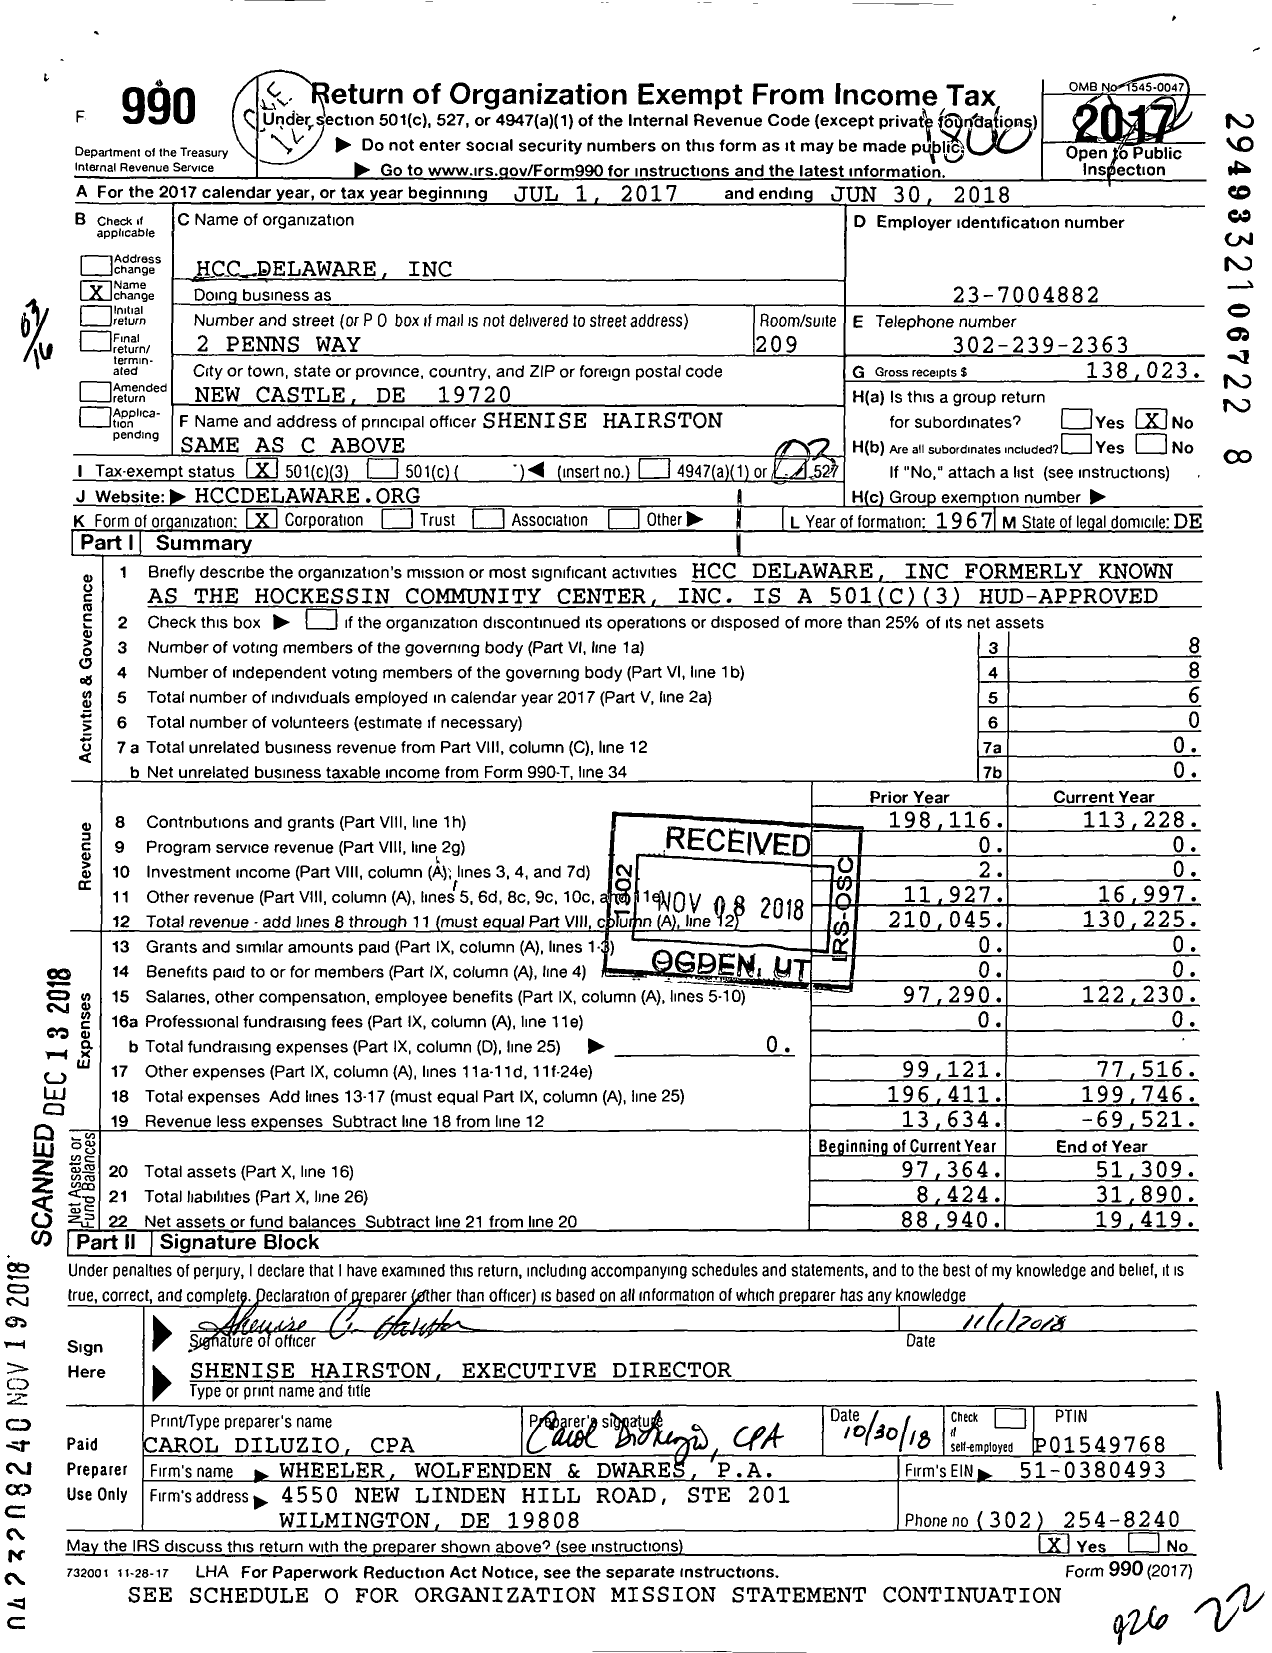 Image of first page of 2017 Form 990 for Hockessin Community Center